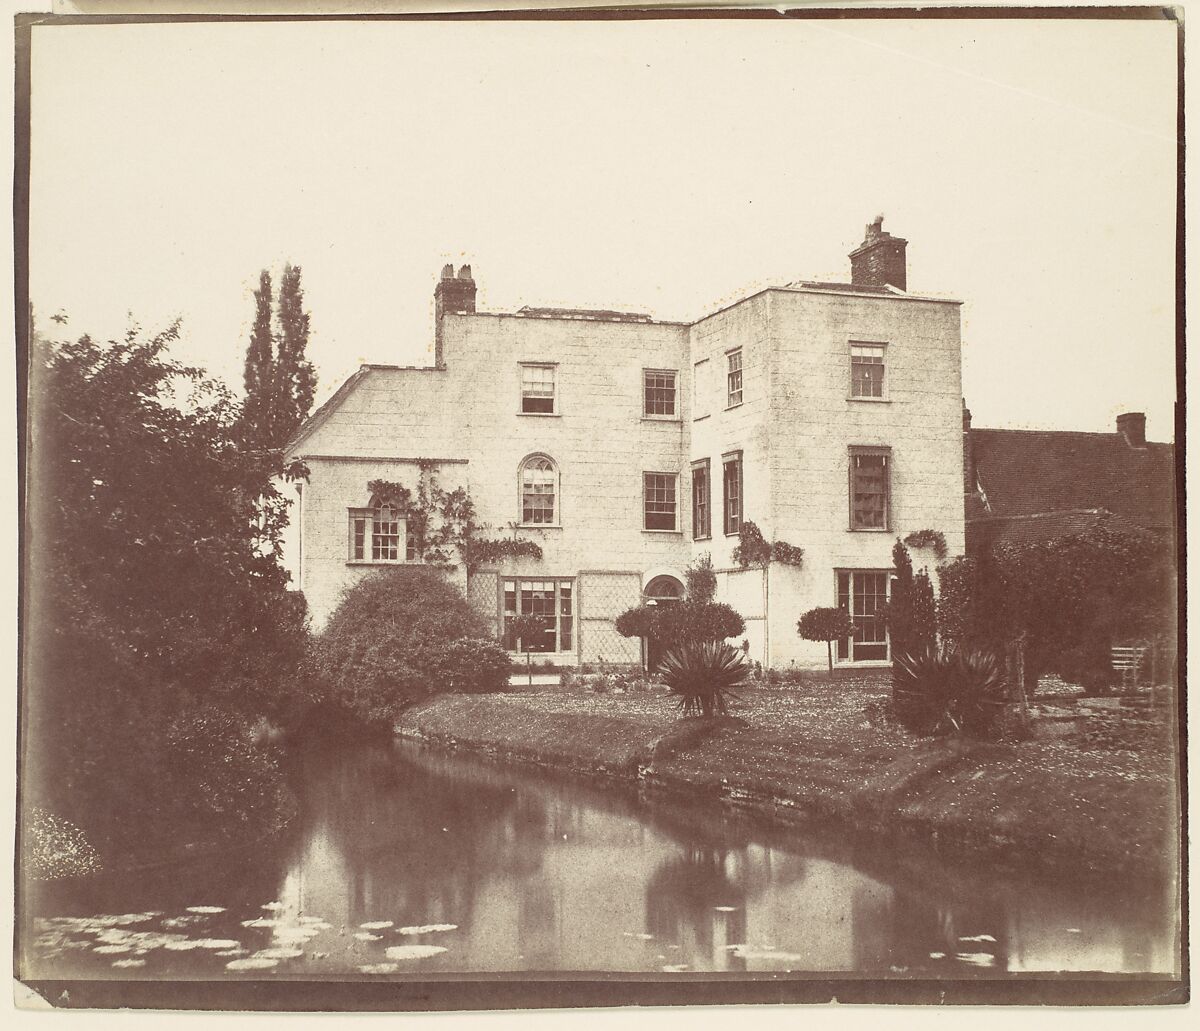 [View of House from Garden by Pond with Lily Pads], Unknown (British), Albumen silver print from paper negative 